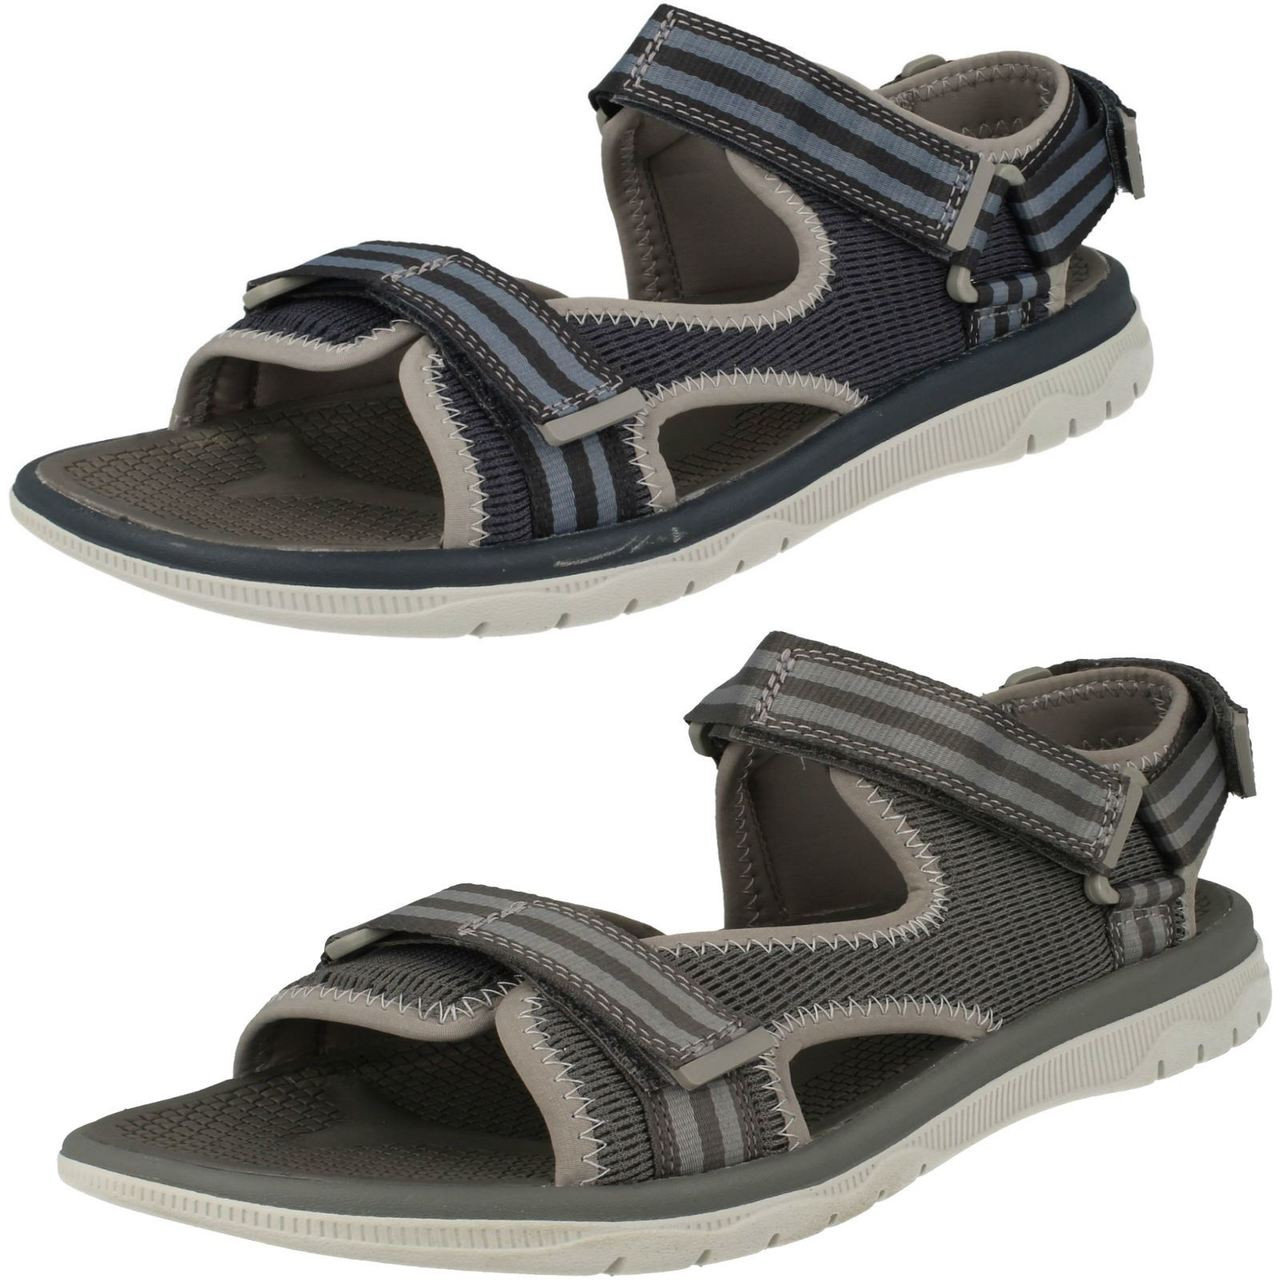 Mens Cloudsteppers by Clarks Sandals 